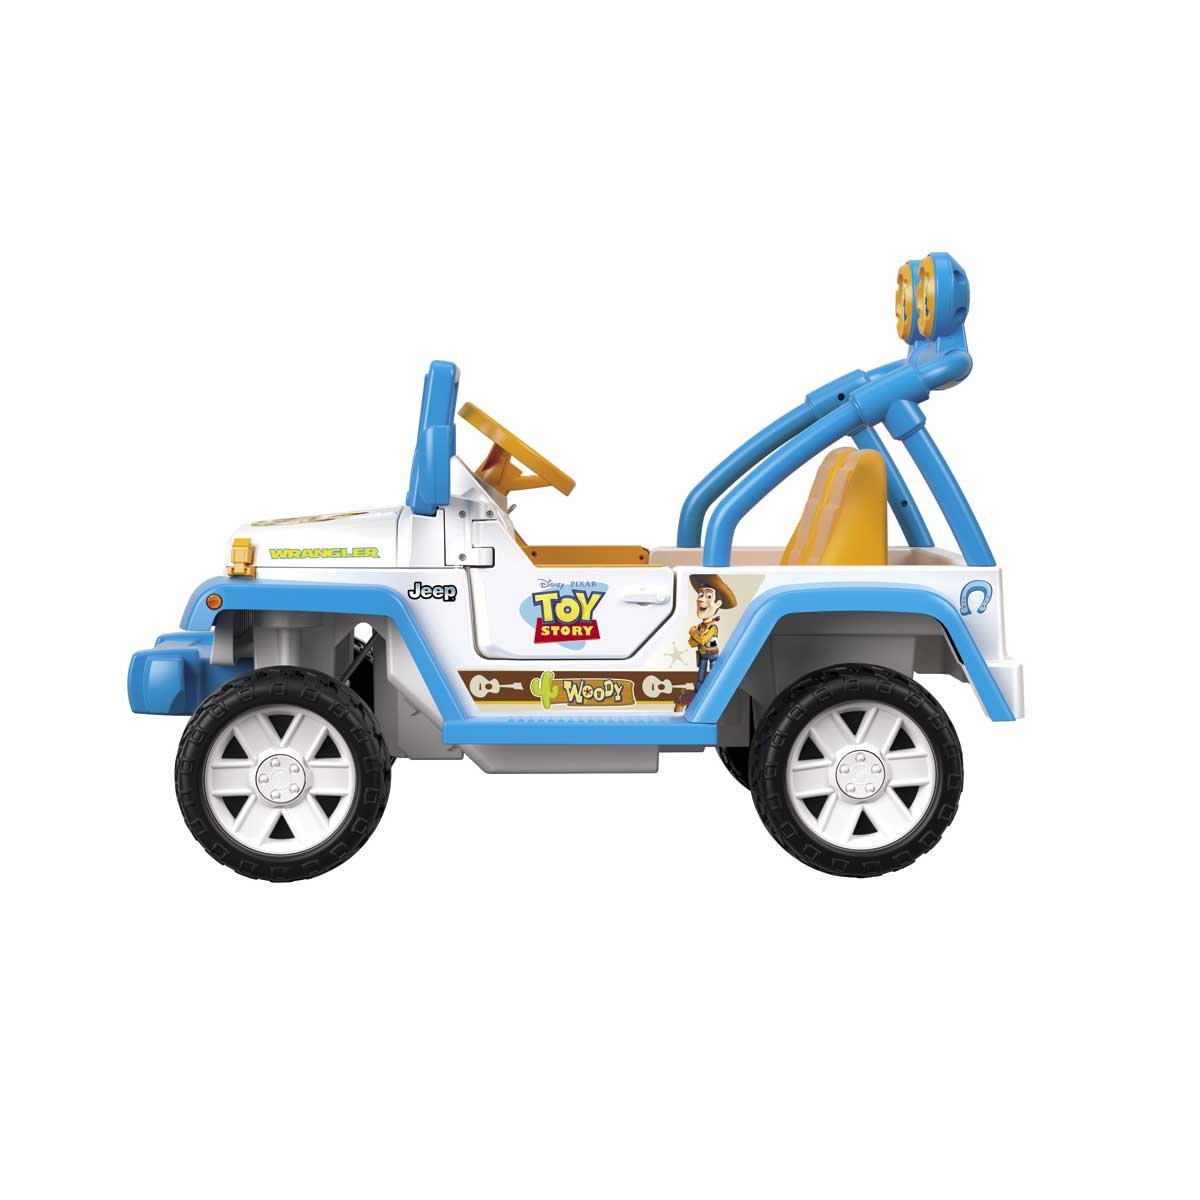 Montable Eléctrico Jeep Buzz Lightyear Toy Story 4